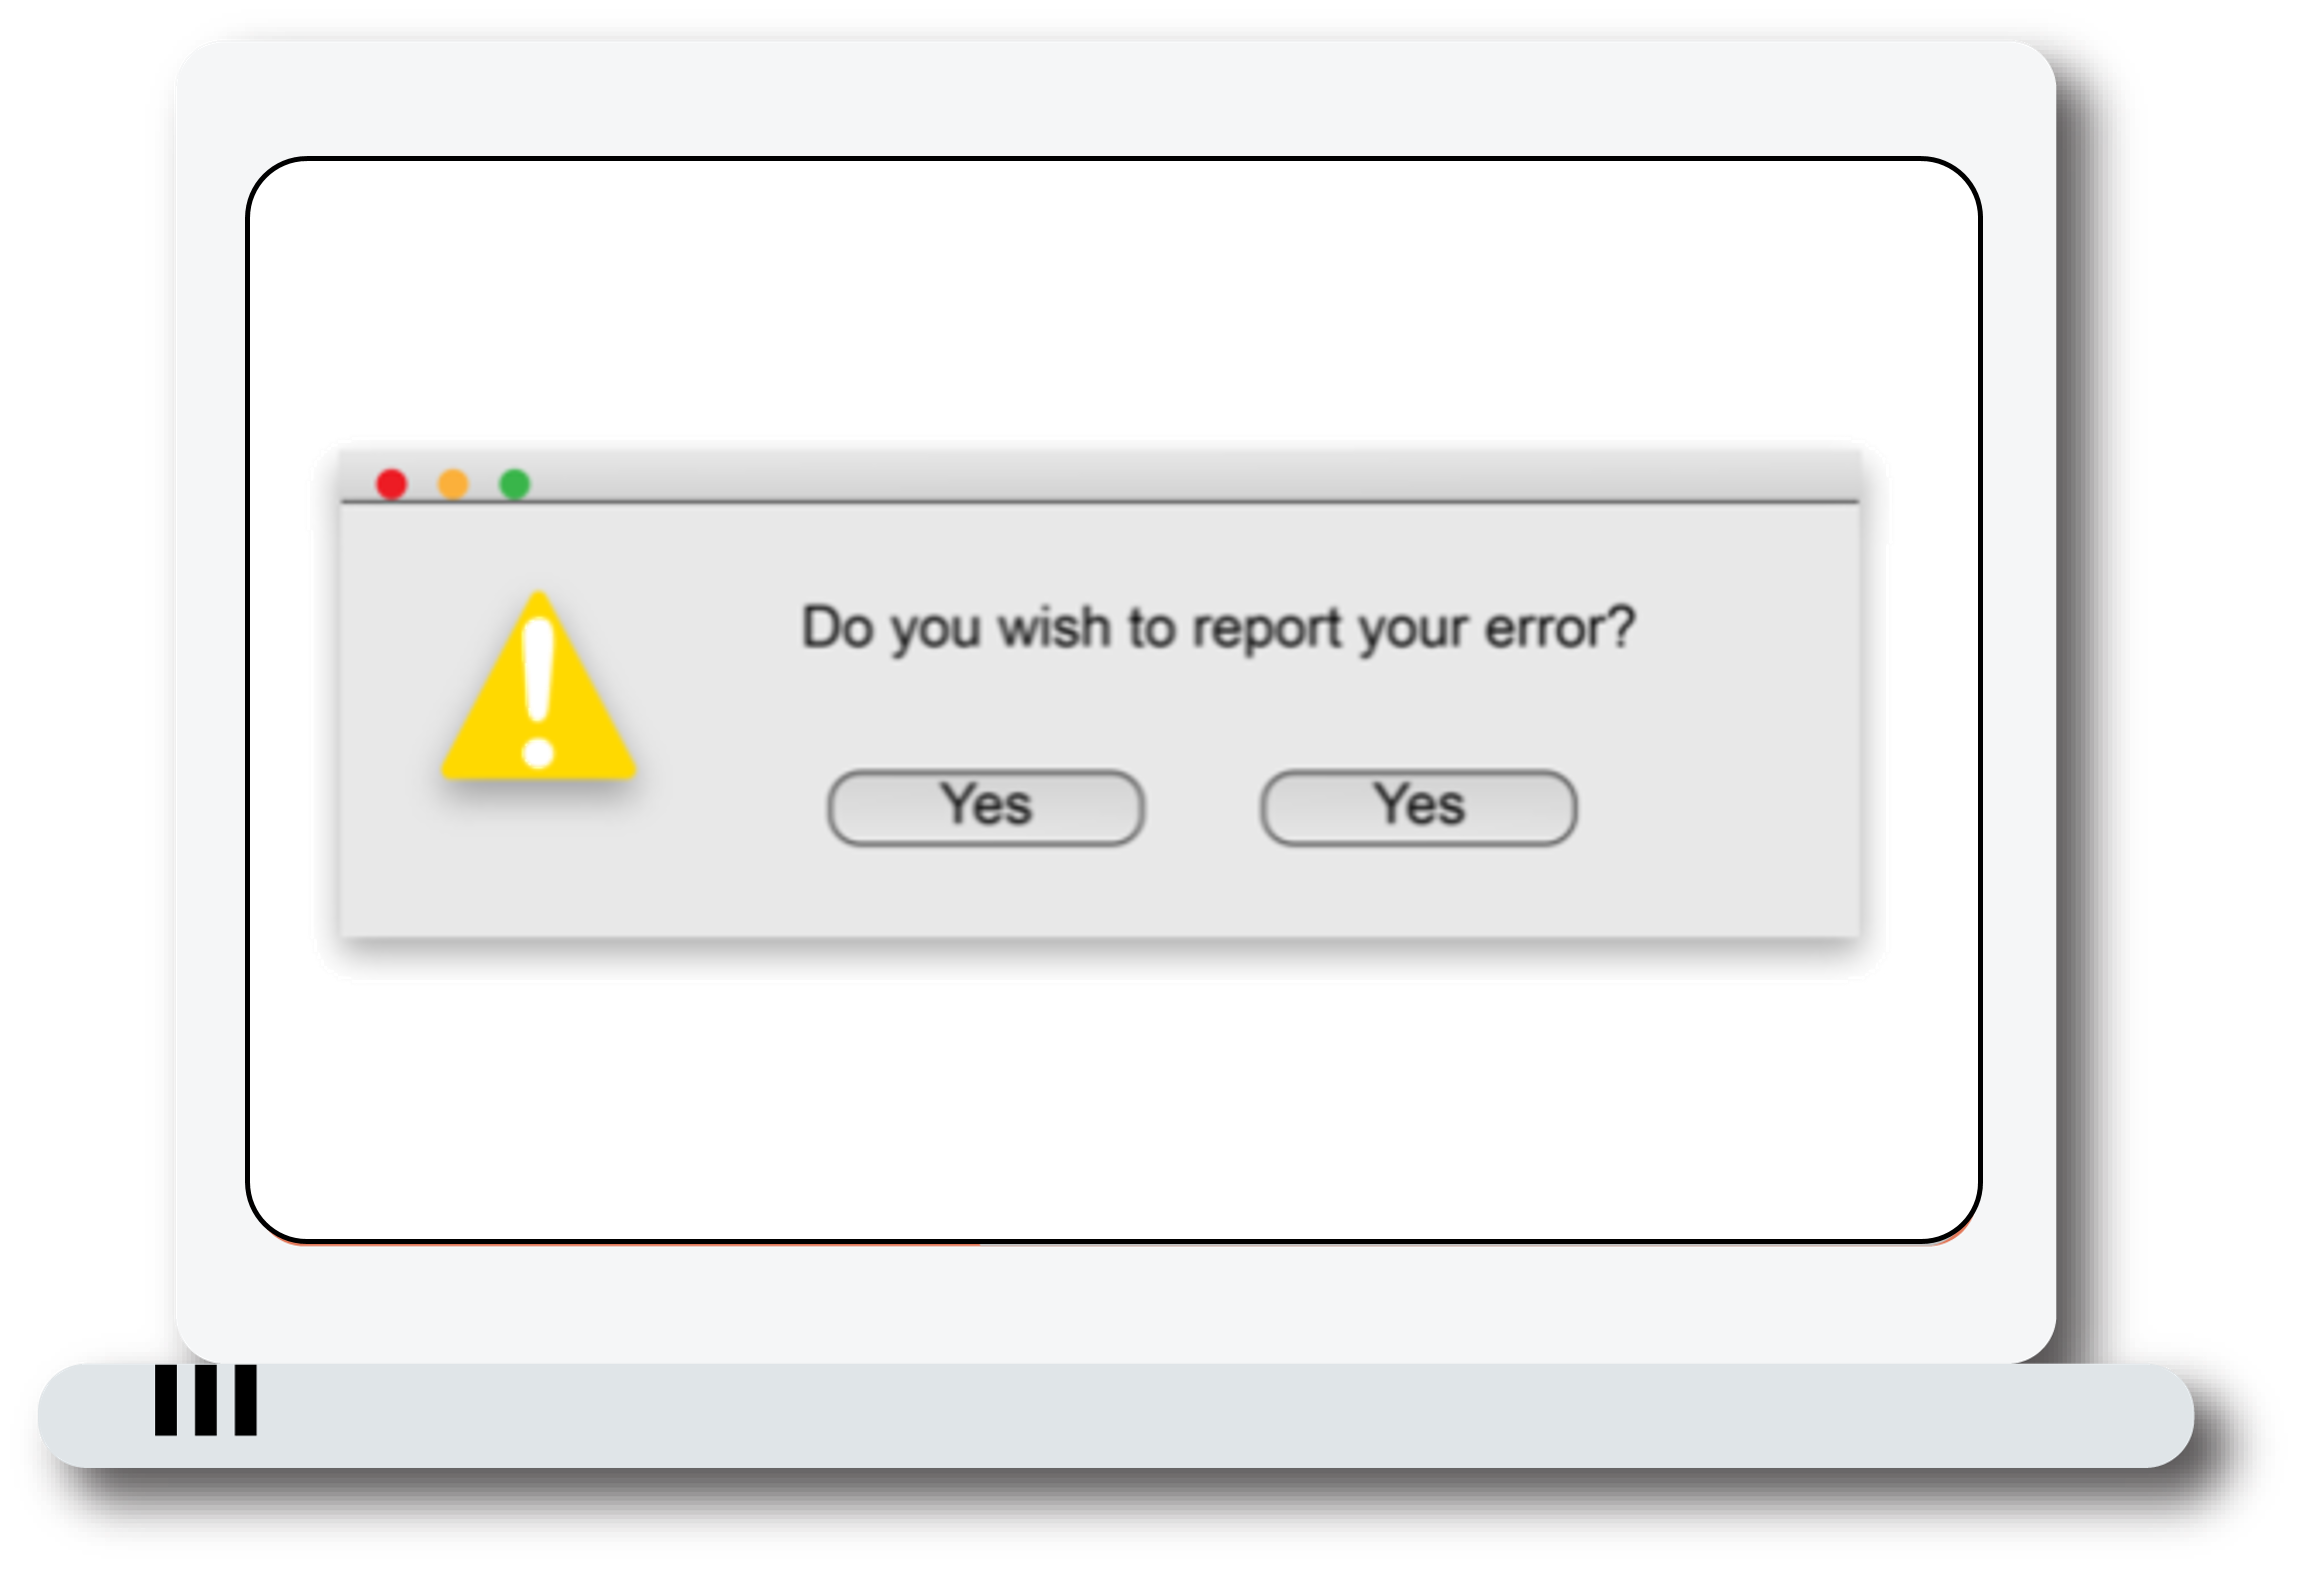 Laptop with a pop-up window that has two buttons that both say yes and the question "Do you wish to report your error?"